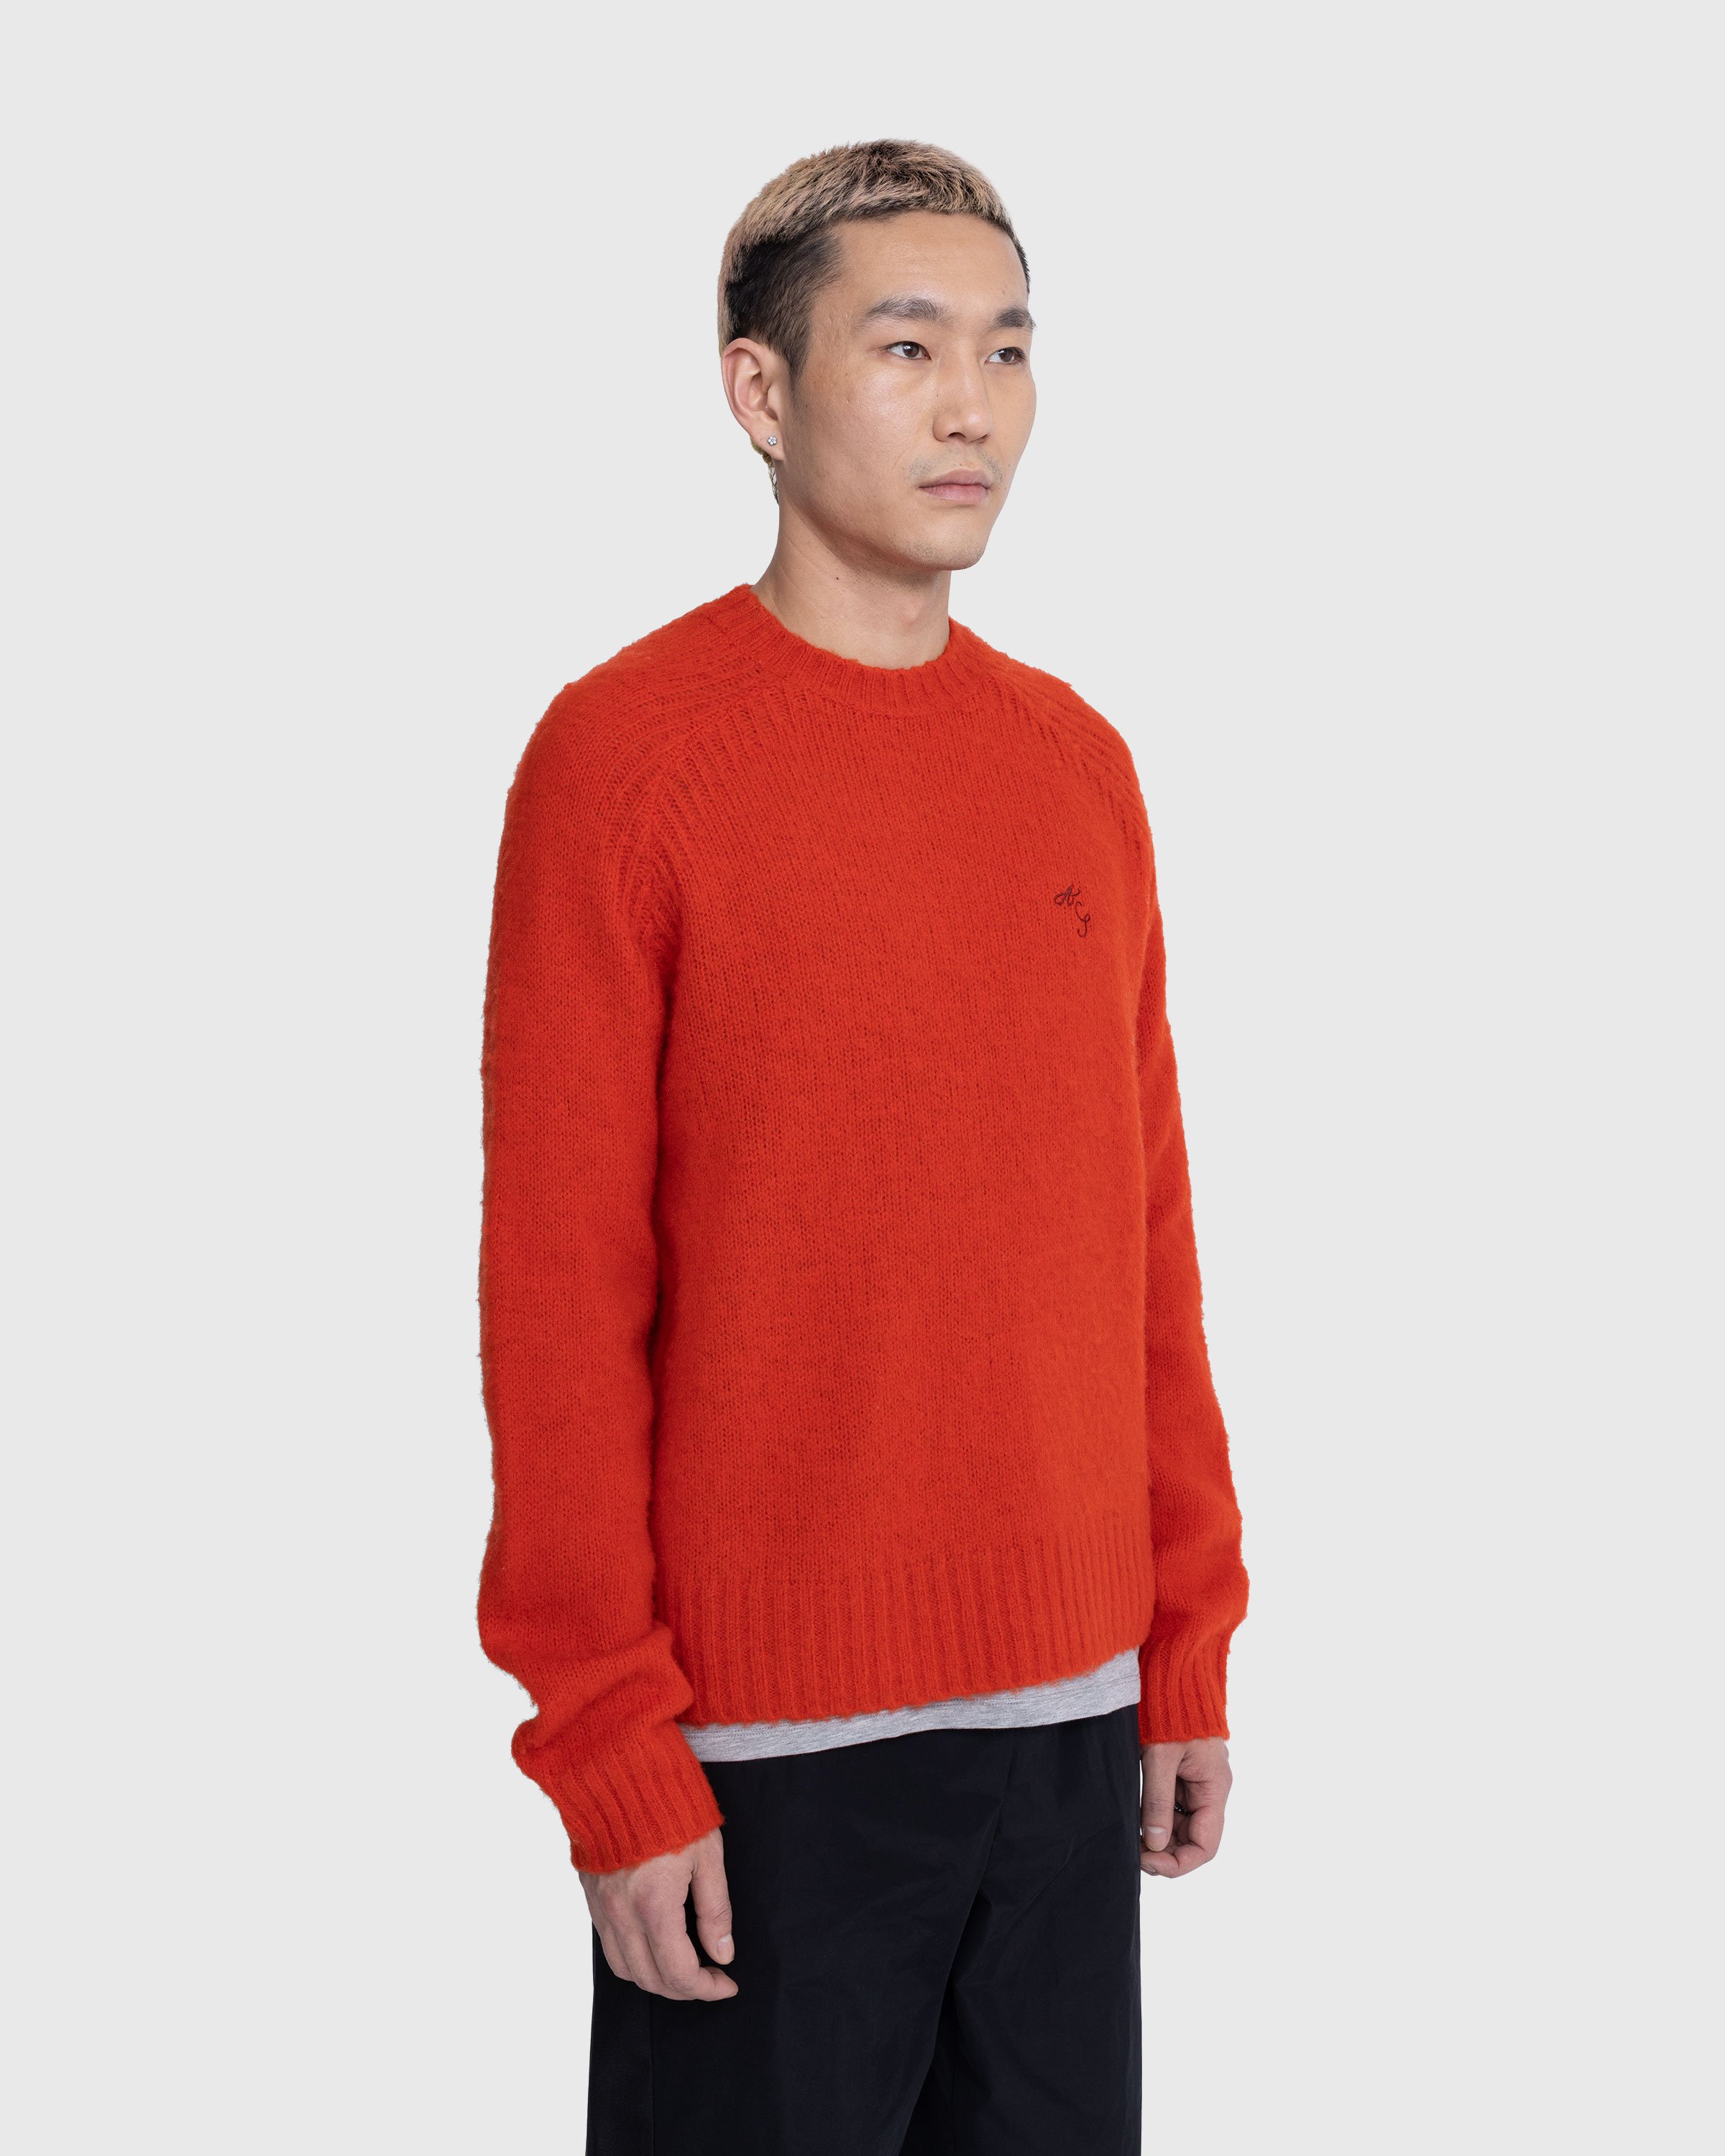 Acne Studios - Embroidered Crewneck Sweater Red - Clothing - Red - Image 4